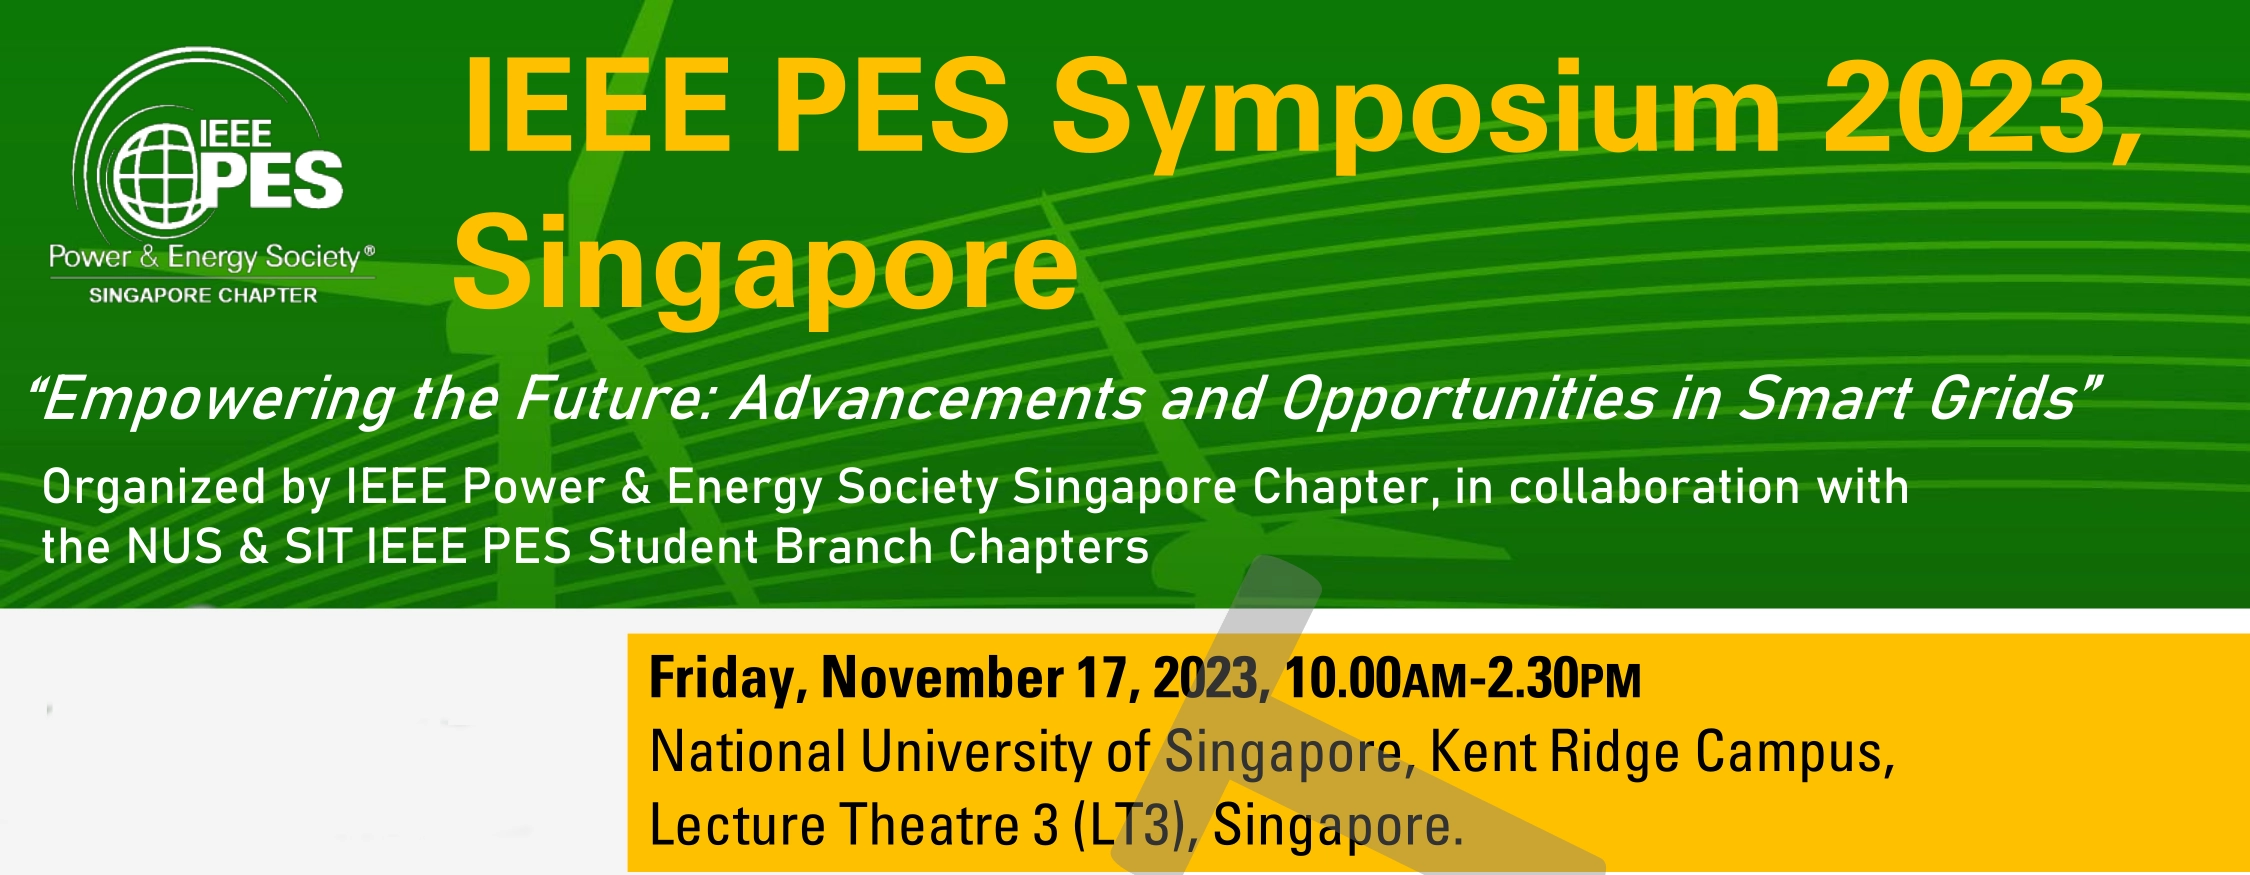 Title picture of IEEE PES Singapore Symposium